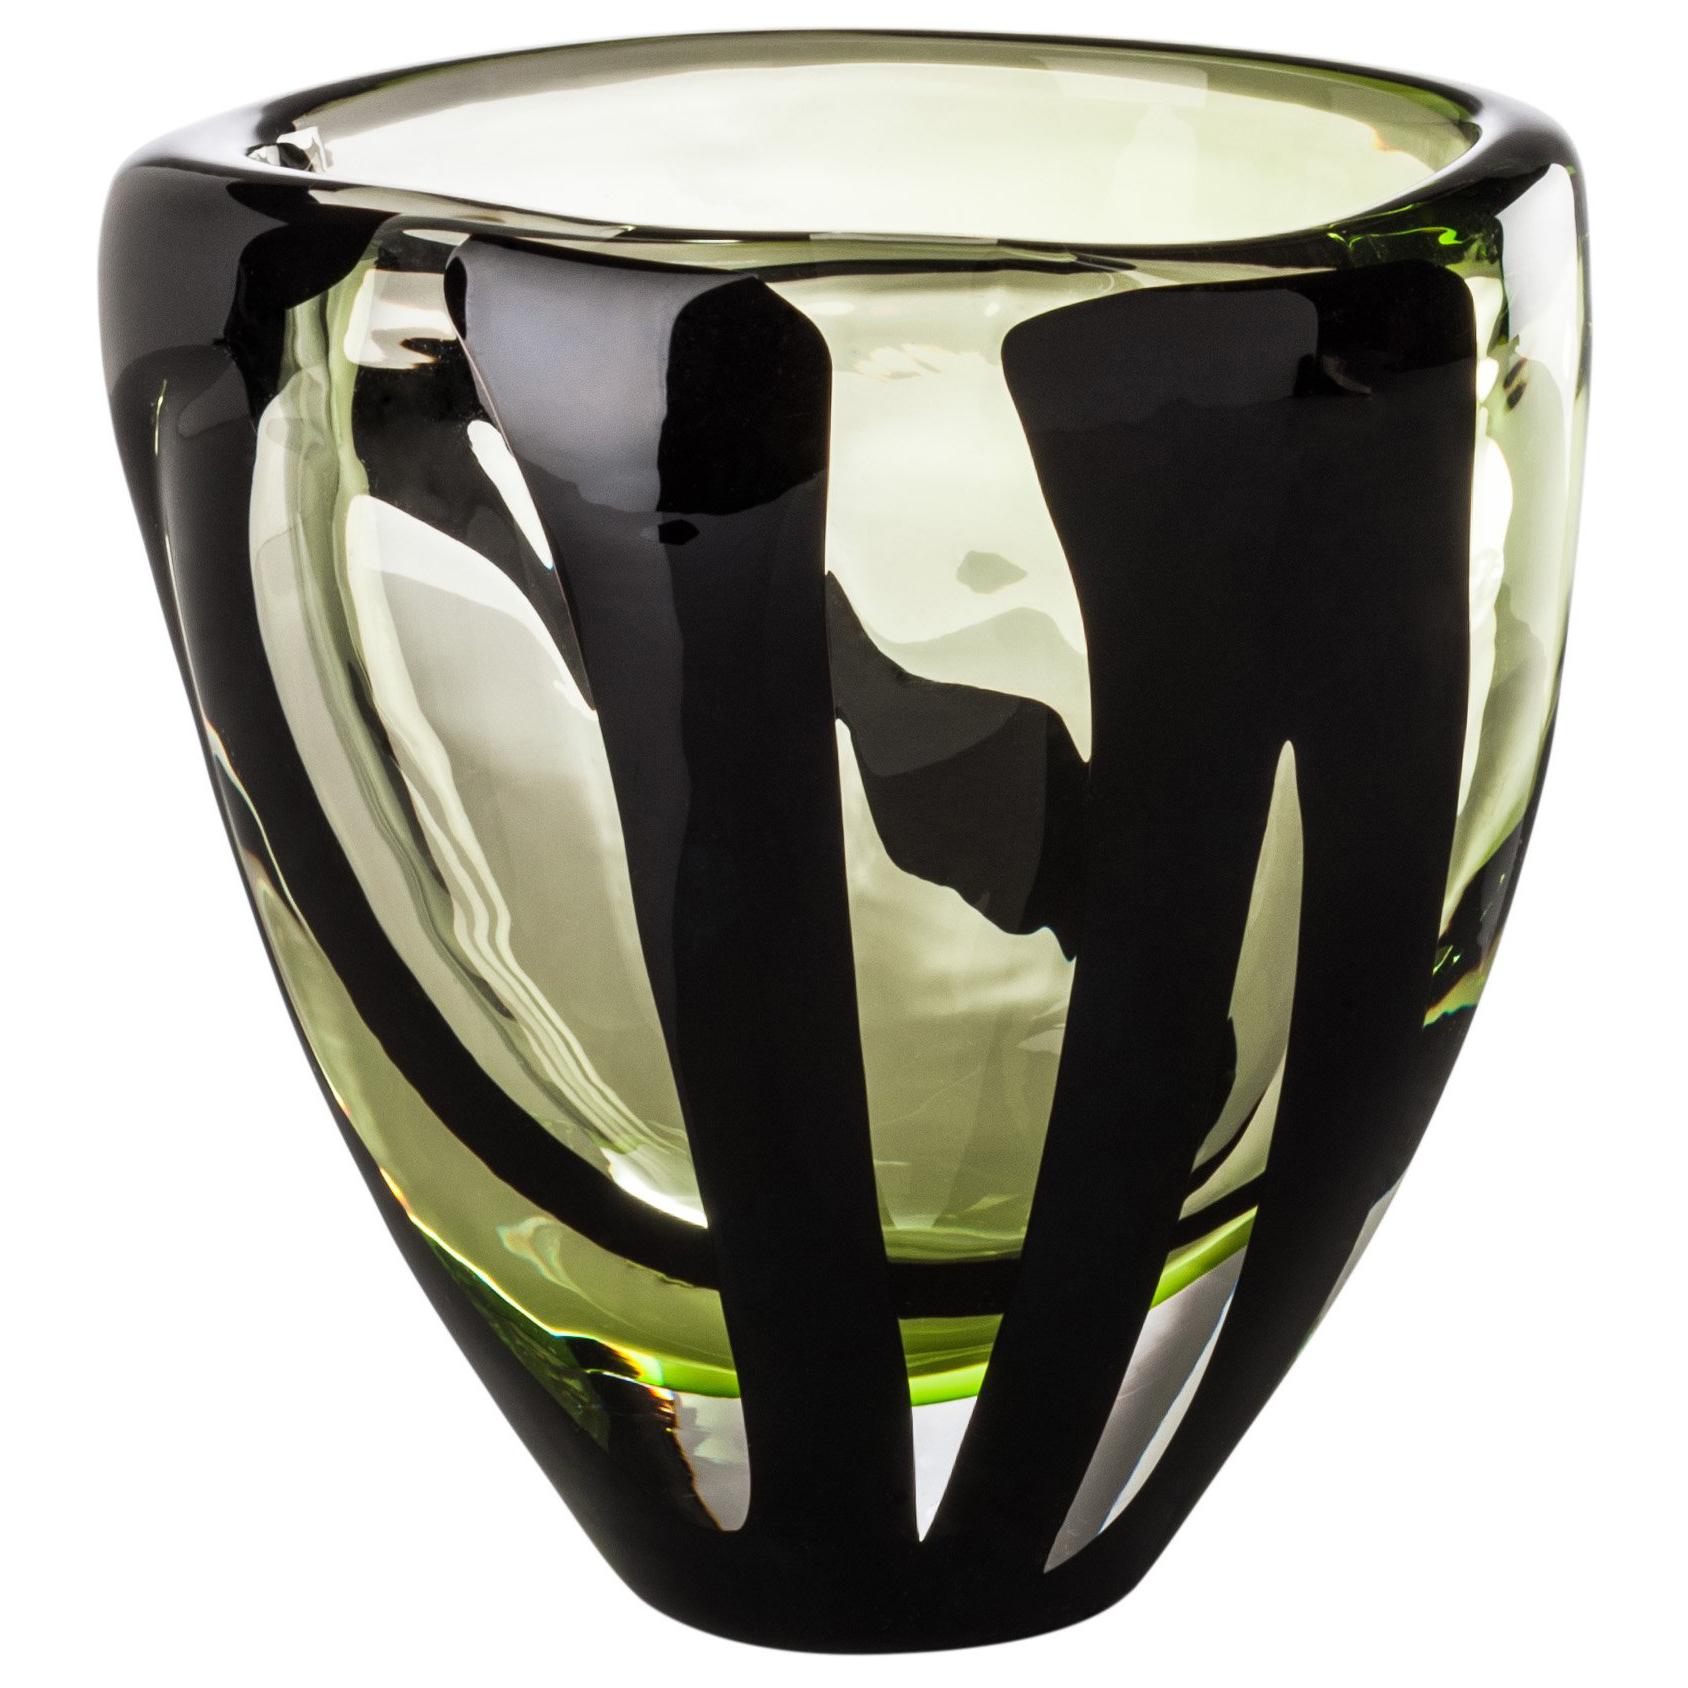 Venini Small Black Belt Oval Glass Vase in Crystal and Green by Peter Marino For Sale